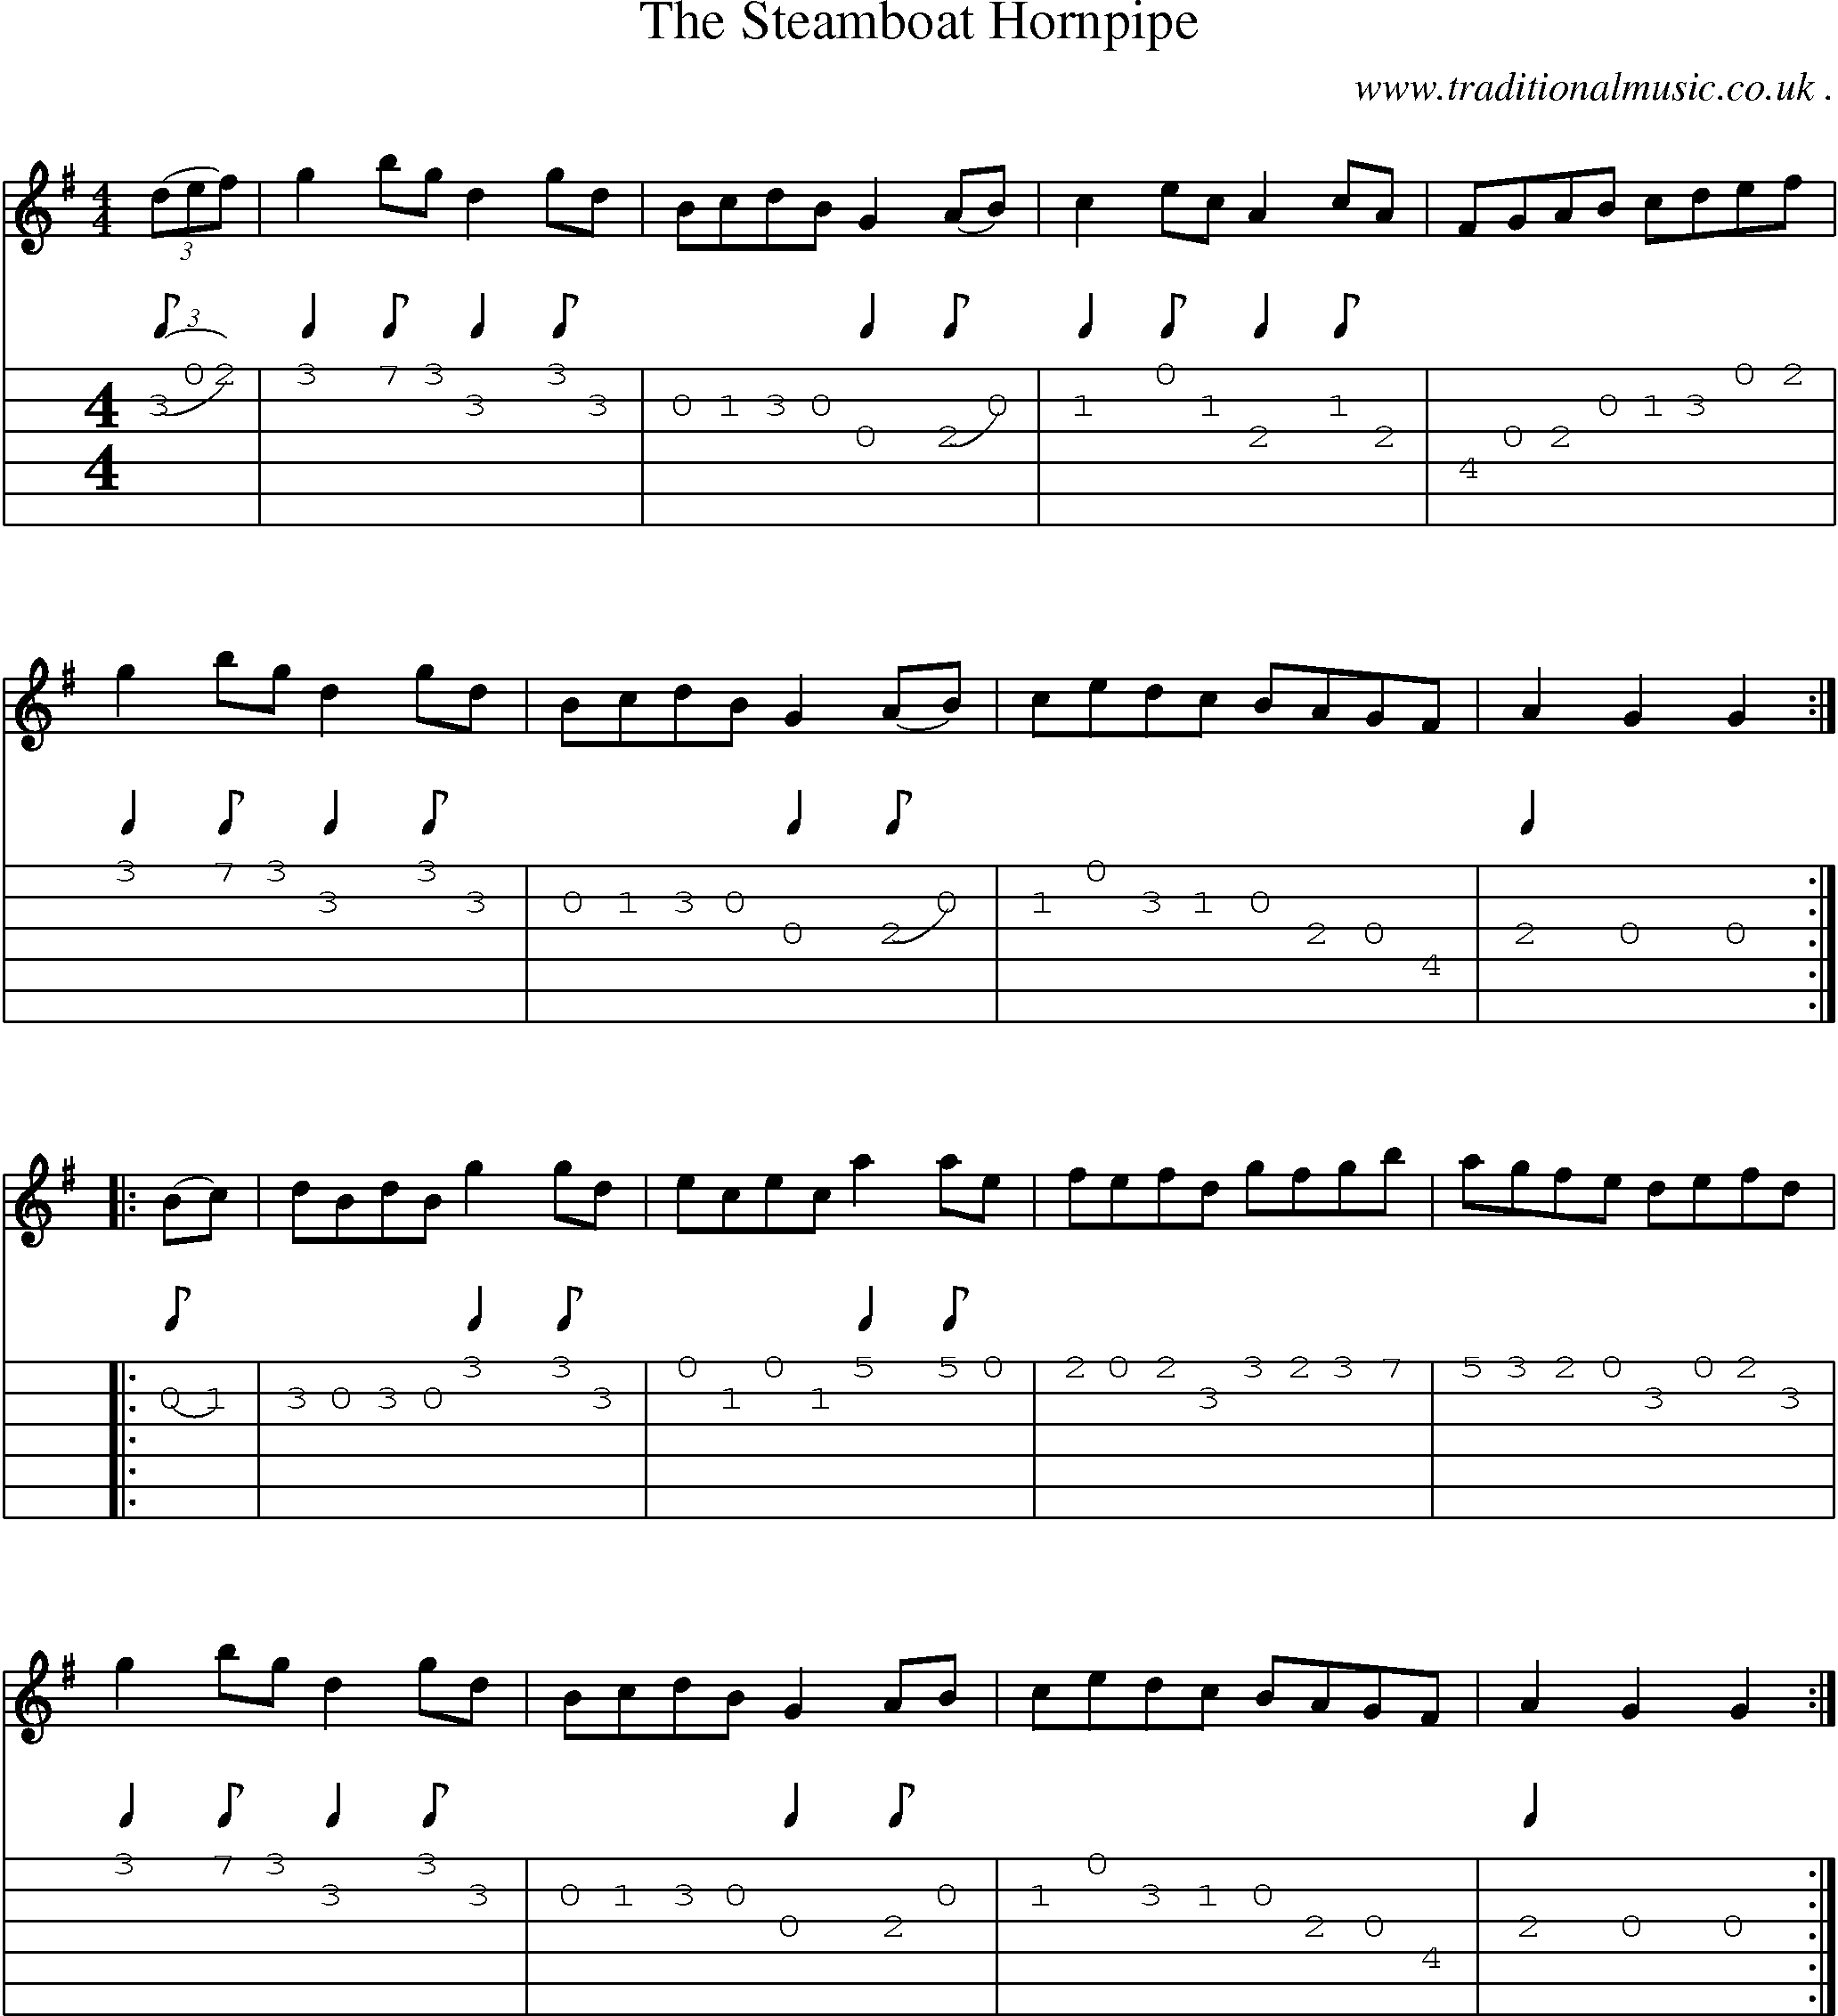 Sheet-Music and Guitar Tabs for The Steamboat Hornpipe